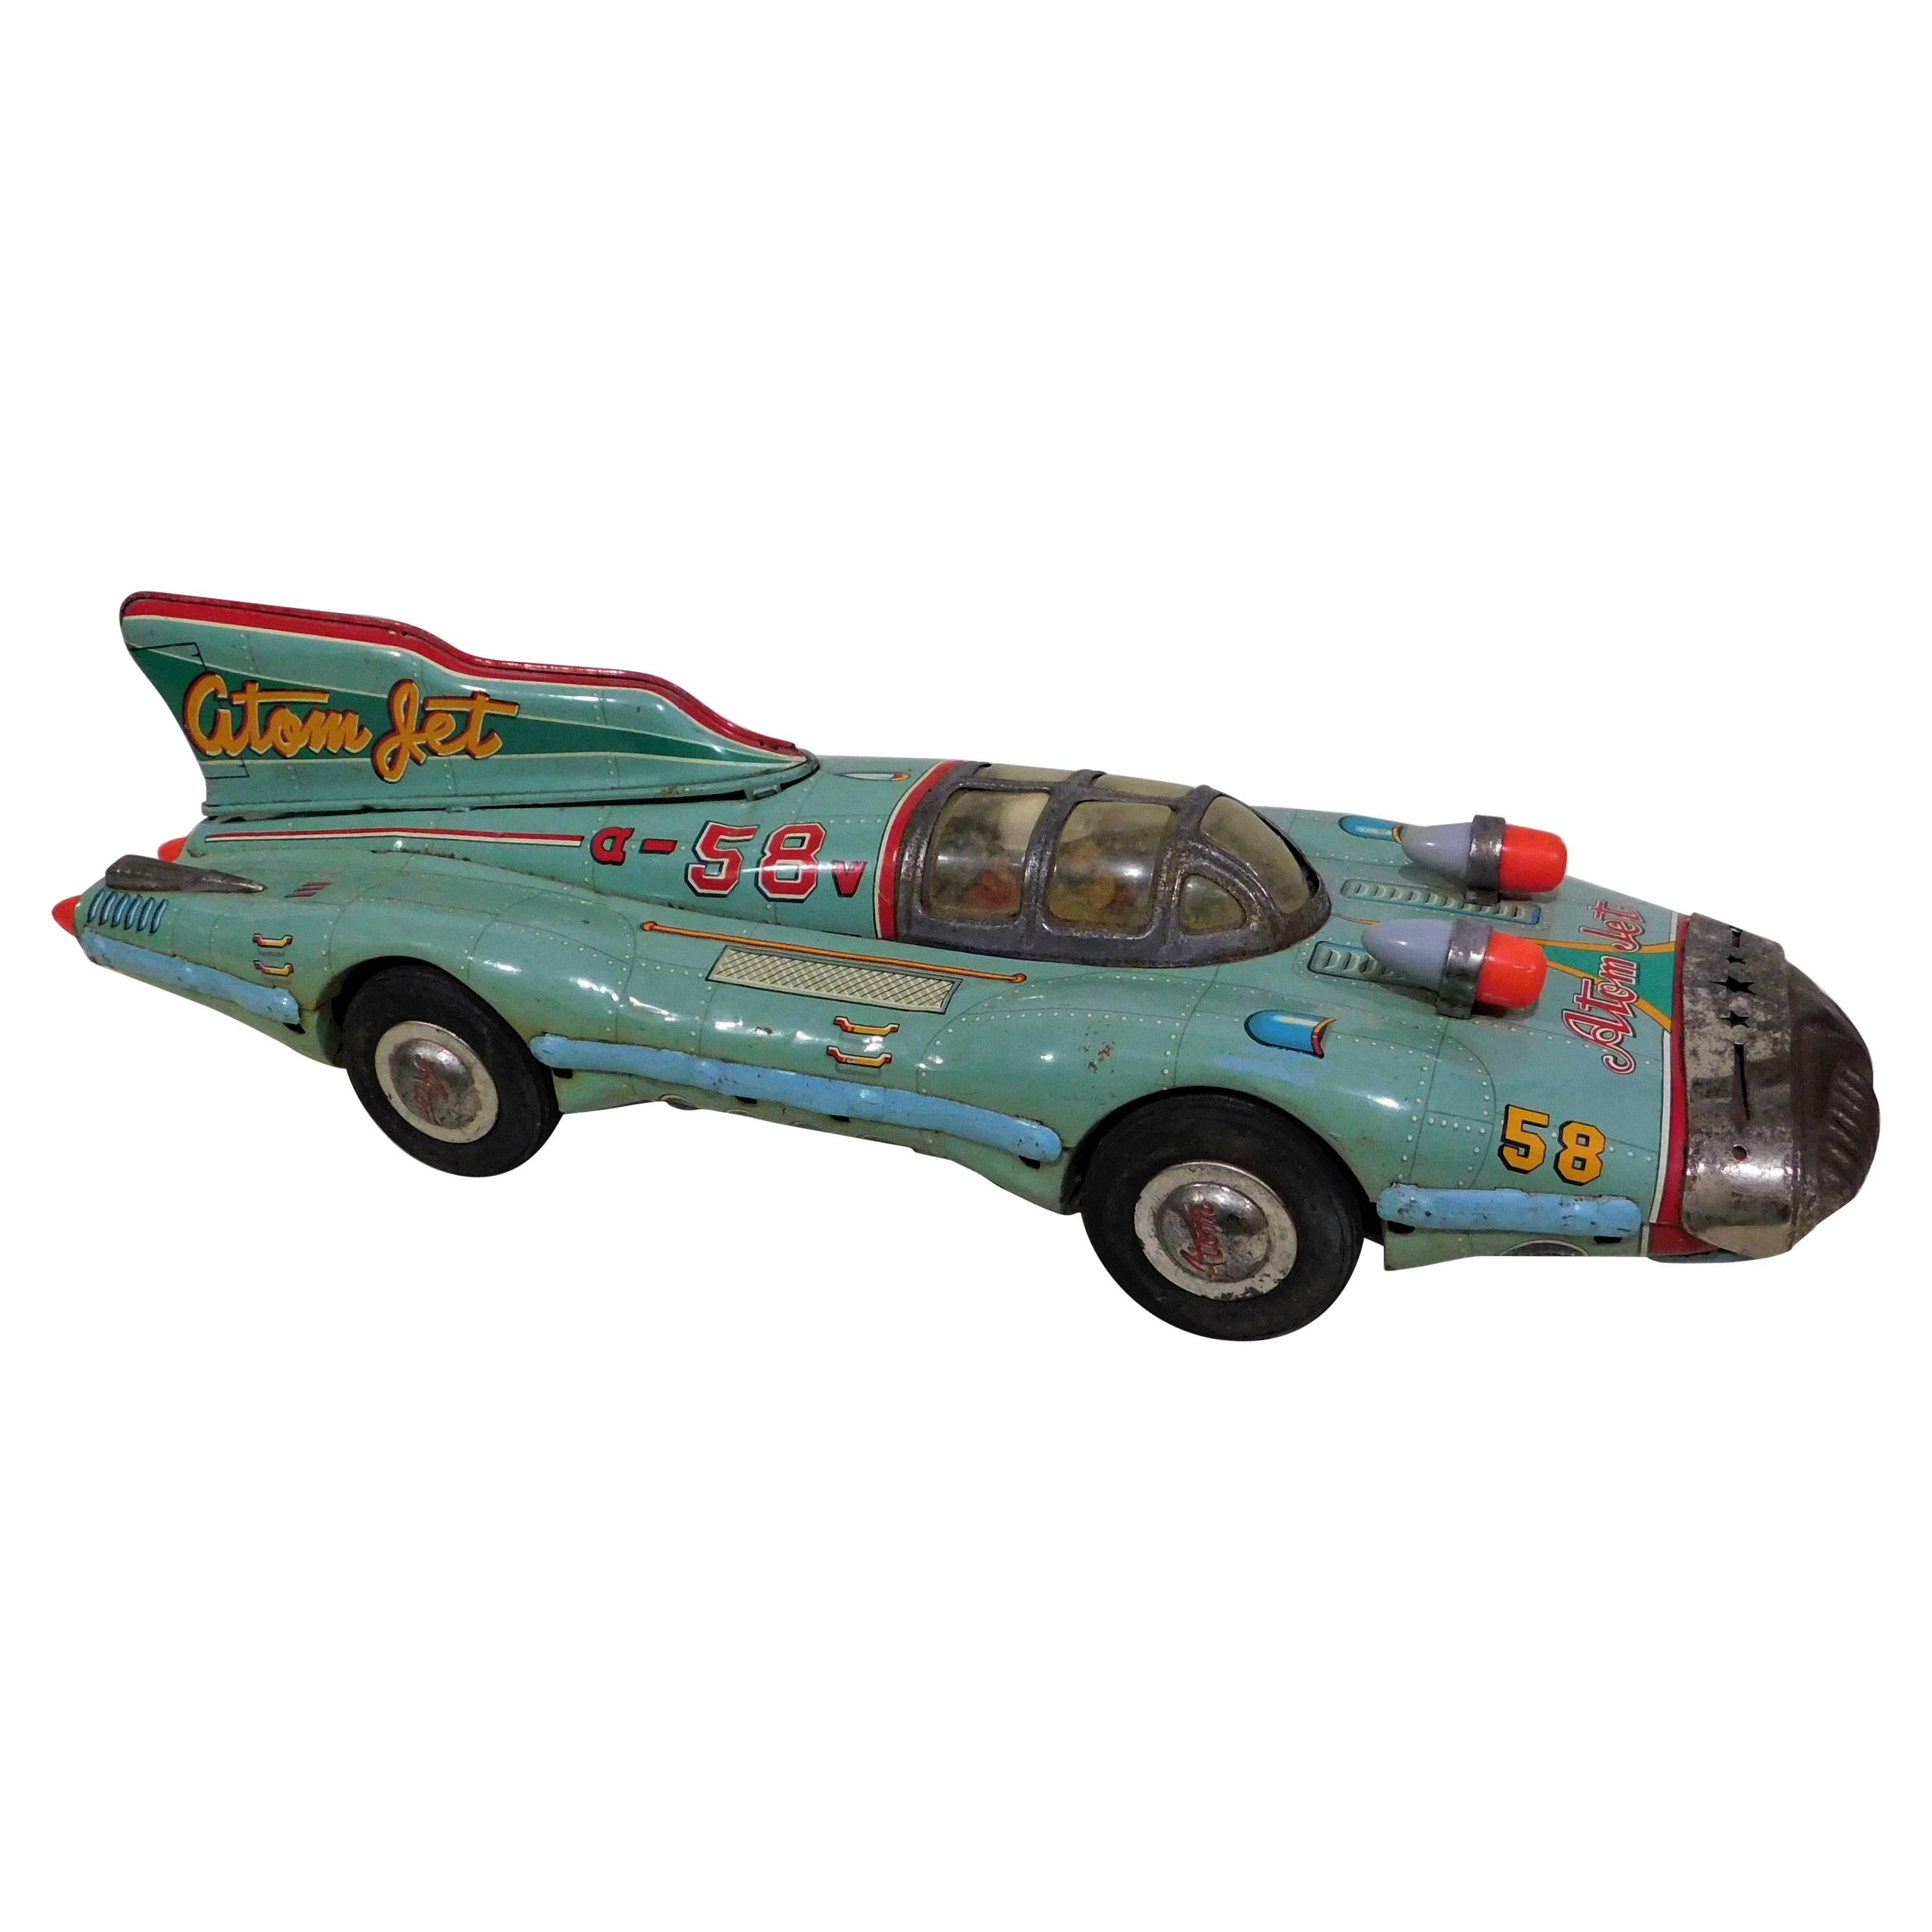 Details about   1950s Ideal Turbo-Jet Car Wind-Up Rocket Race Toy with Launching Platform Works 